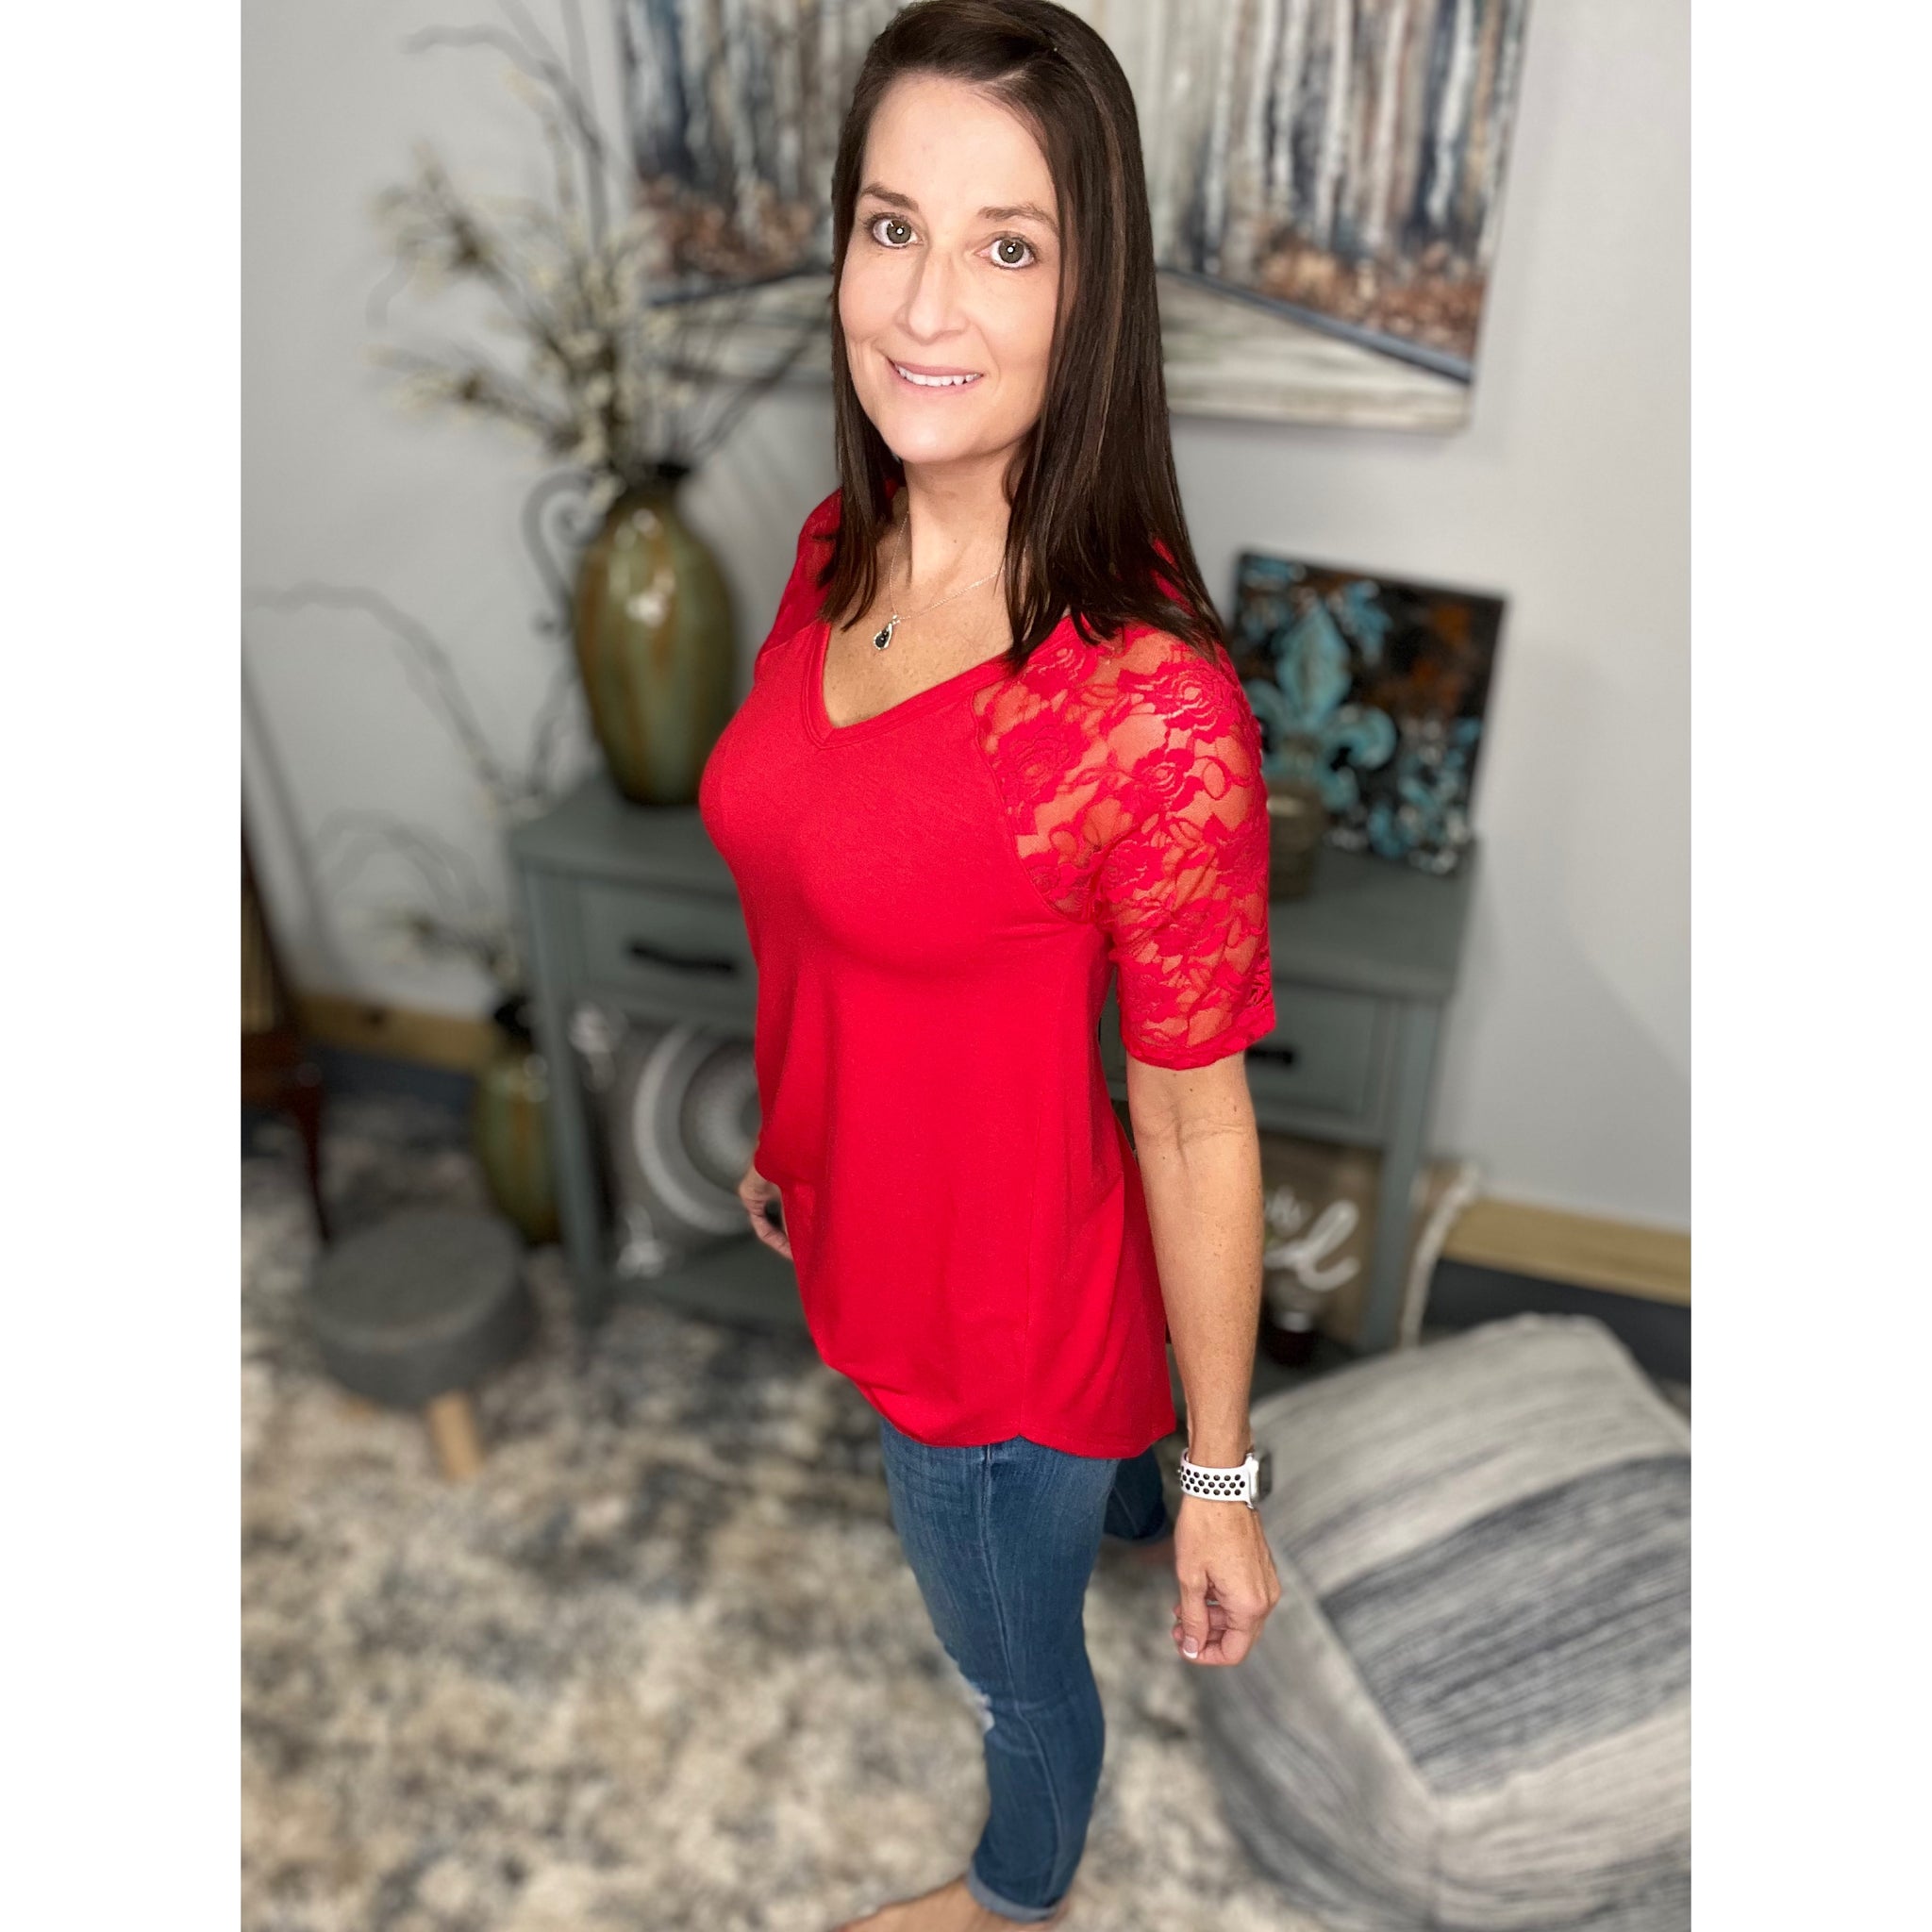 "All About The Lace" Lace Short Sleeve V Neck Rounded Bottom Dressy Red